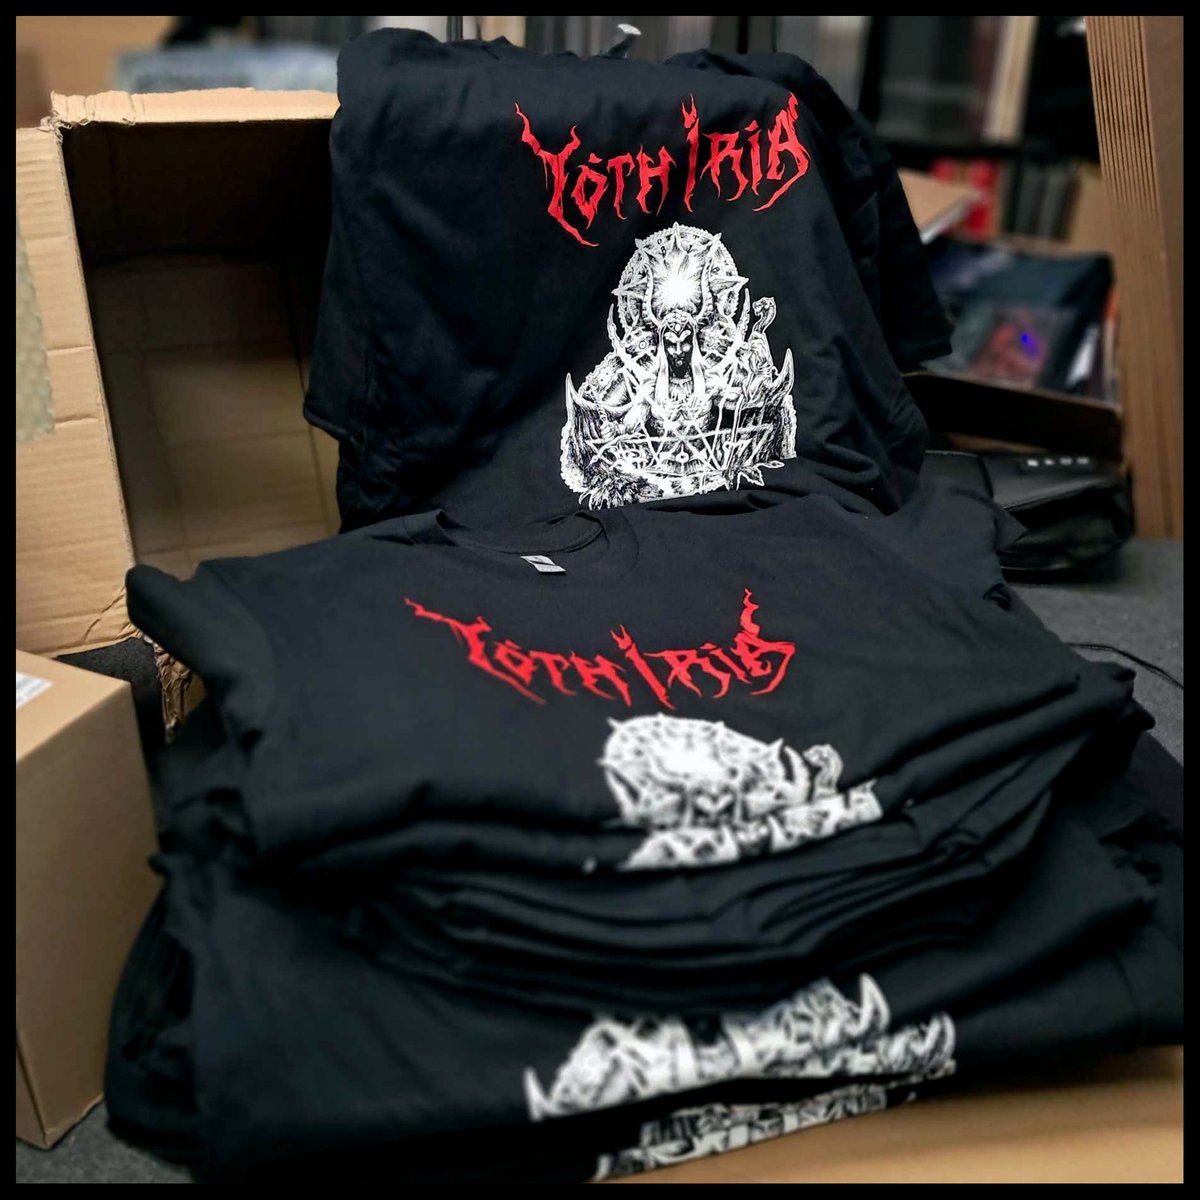 Yoth Iria shirts ready for Incineration festival this weekend...